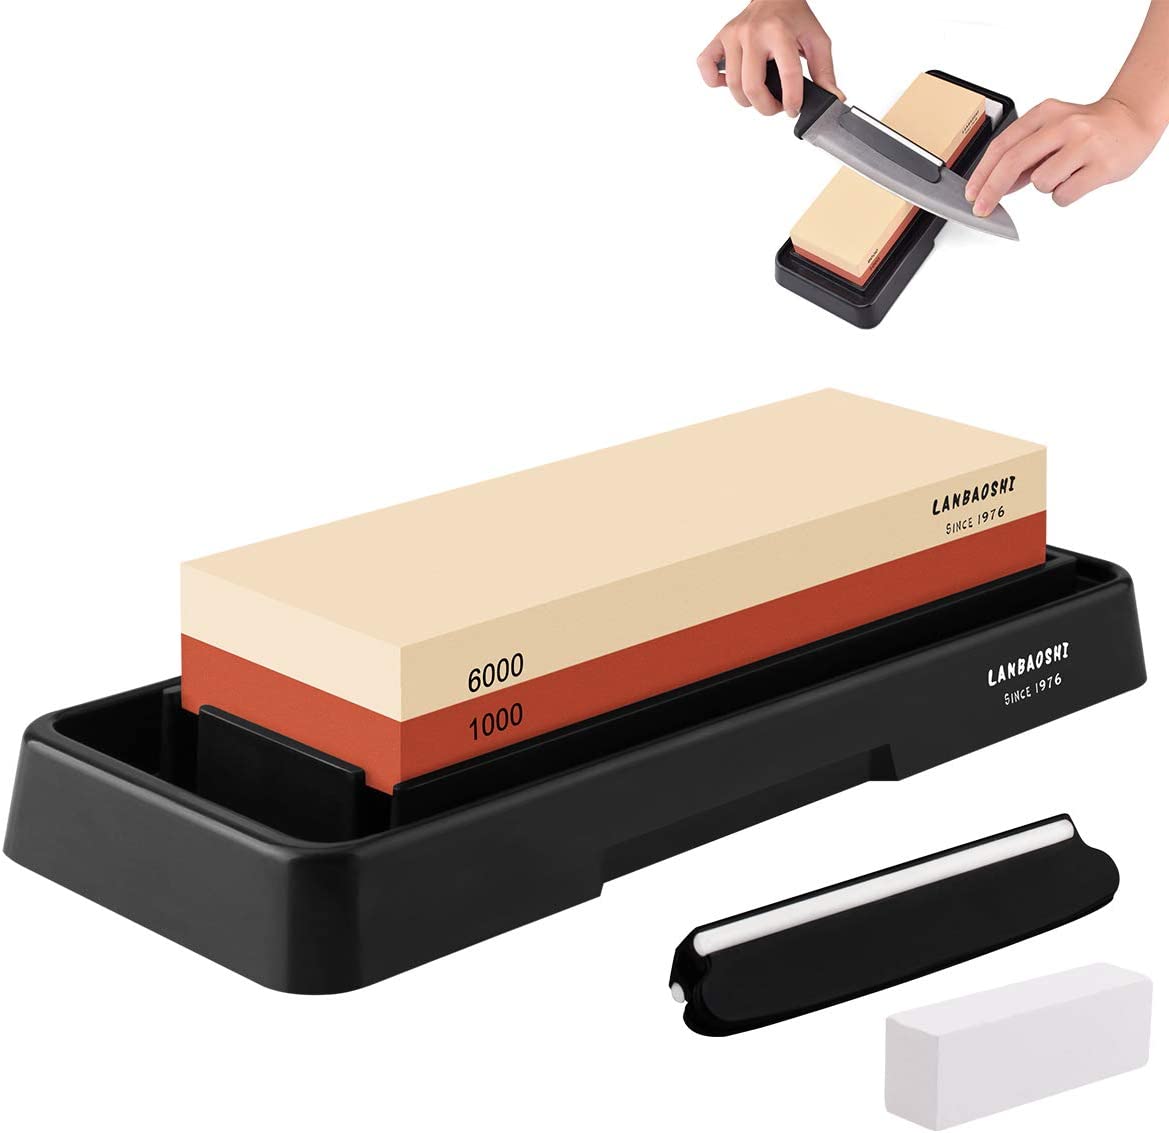 Knife Sharpening Stone Set, 2 Side Grit Whetstone 1000/6000 Chef Knife Sharpener Stone Kit, Waterstone with Nonslip Base, Angle Guide, Fixer Stone for Pocket Knife Kitchen Razor Clippers Blades